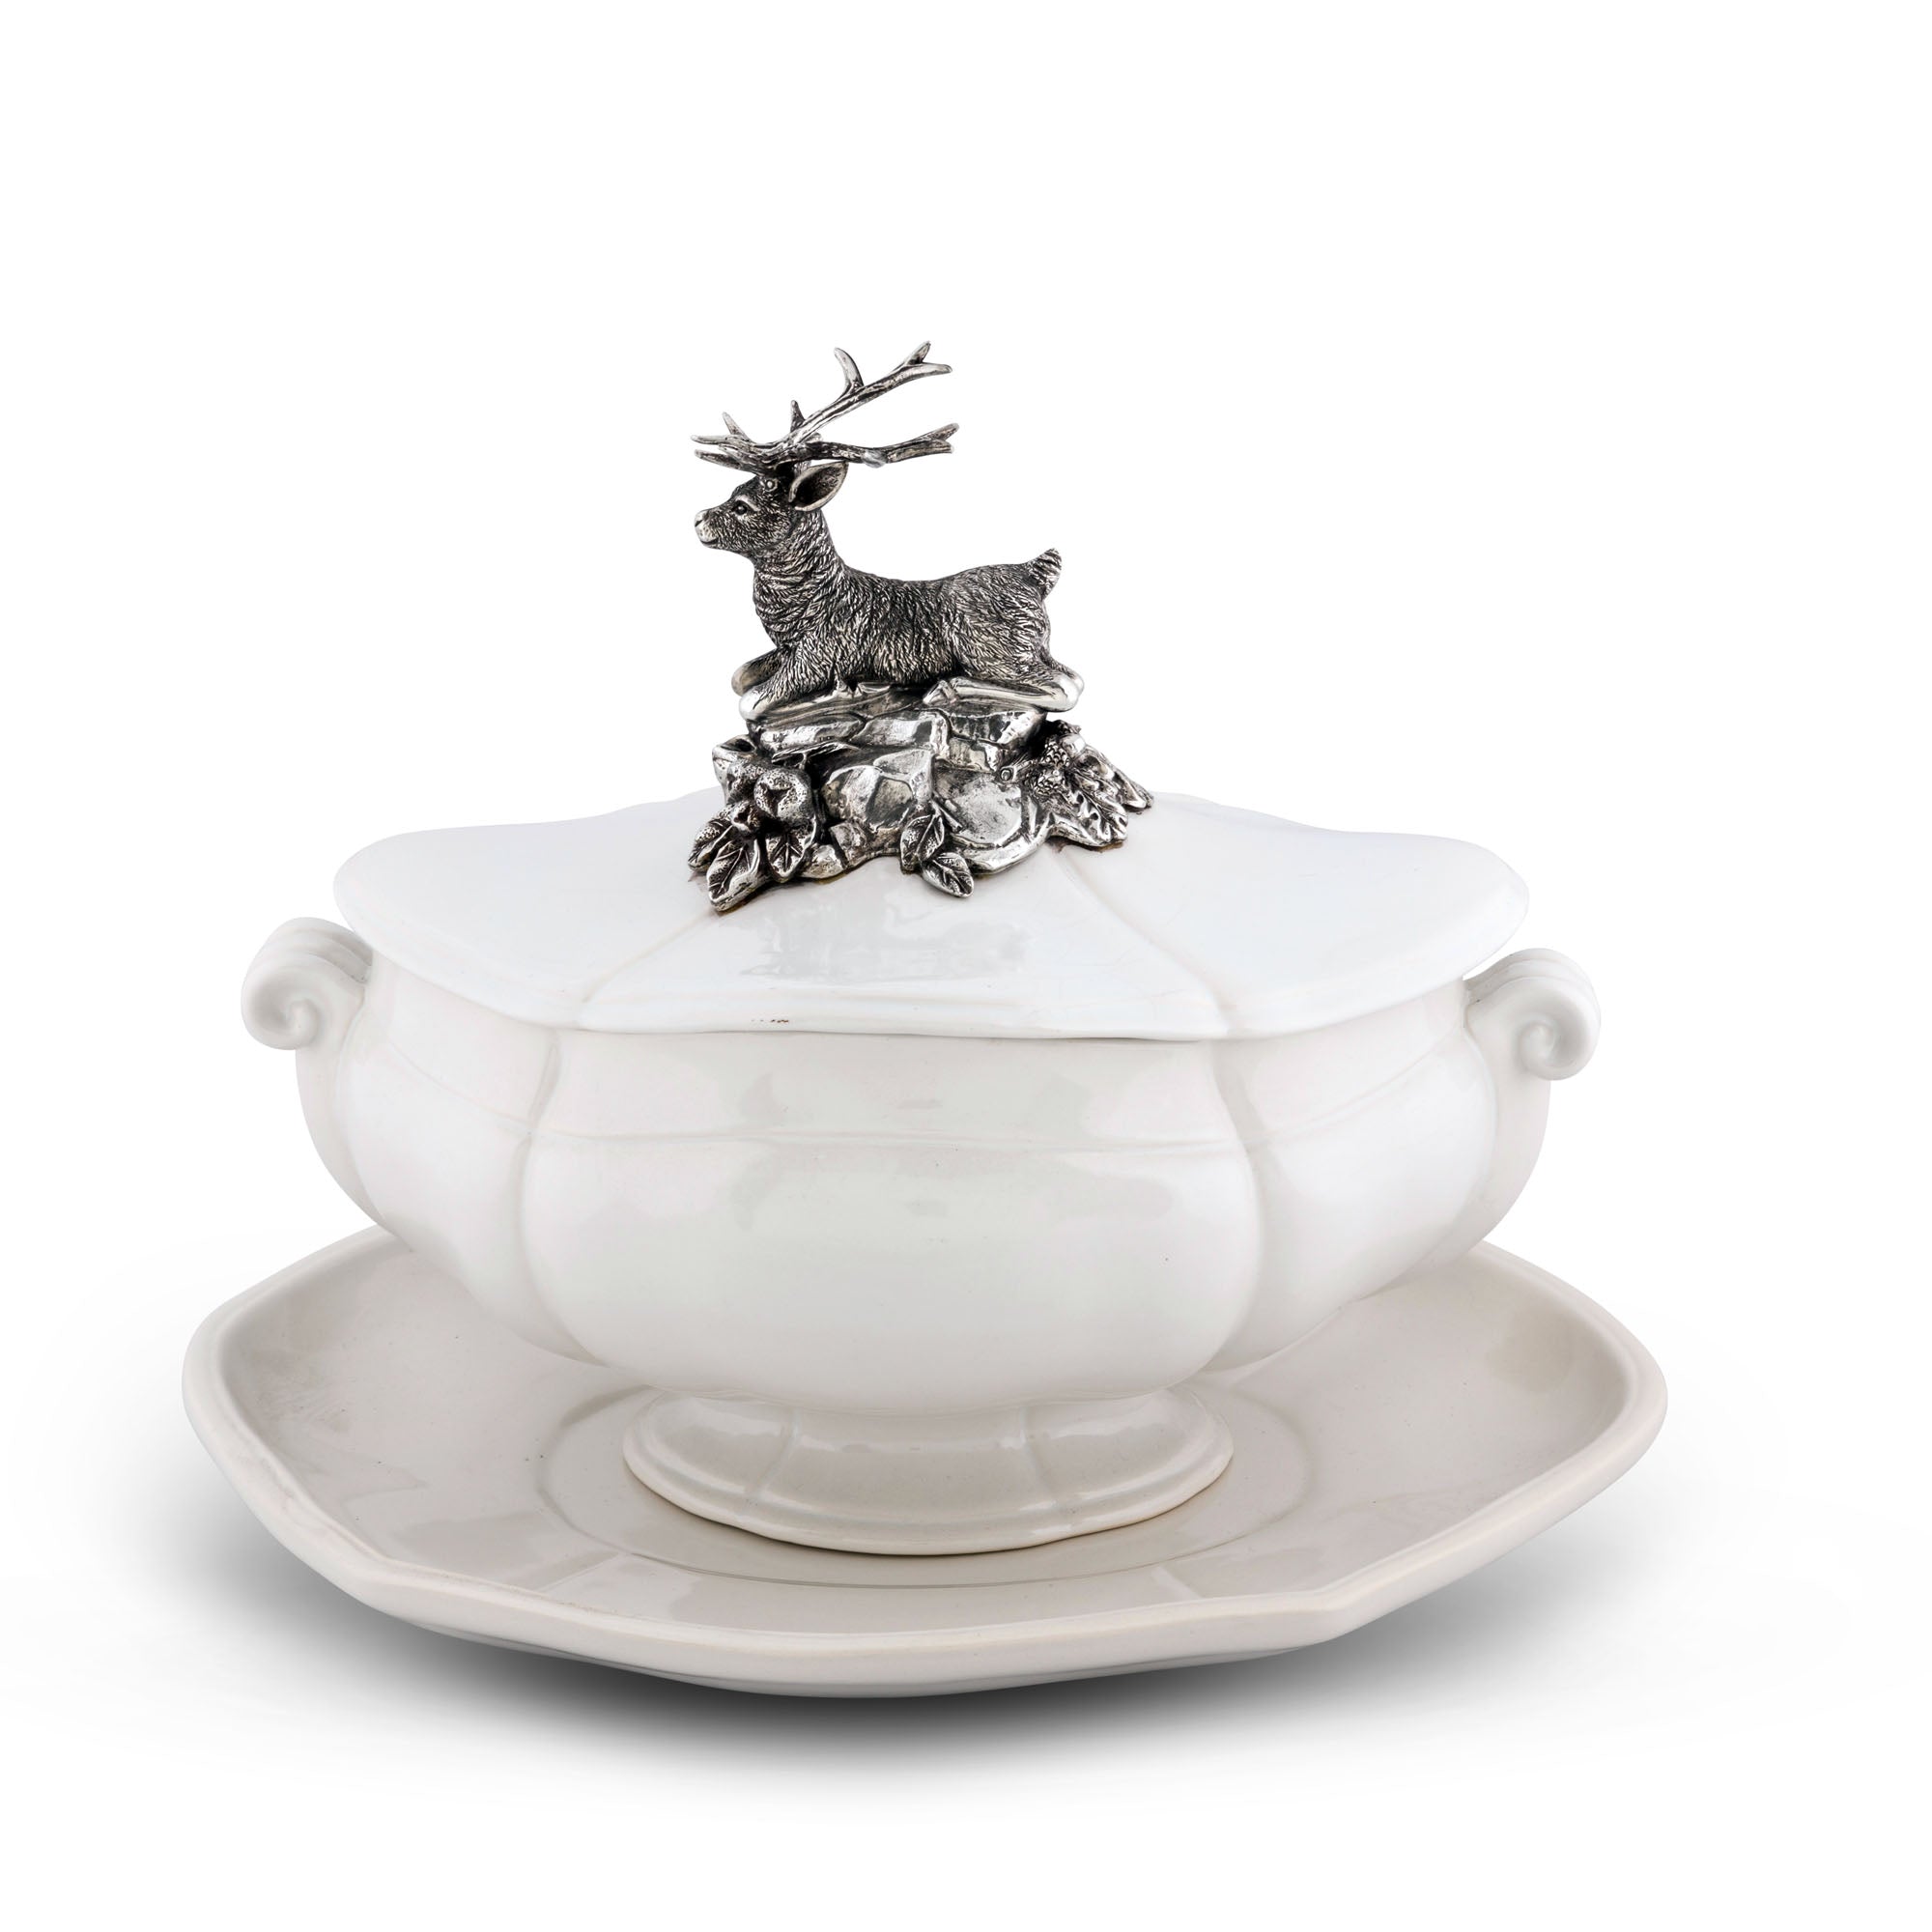 Vagabond House Stag Soup Tureen Product Image